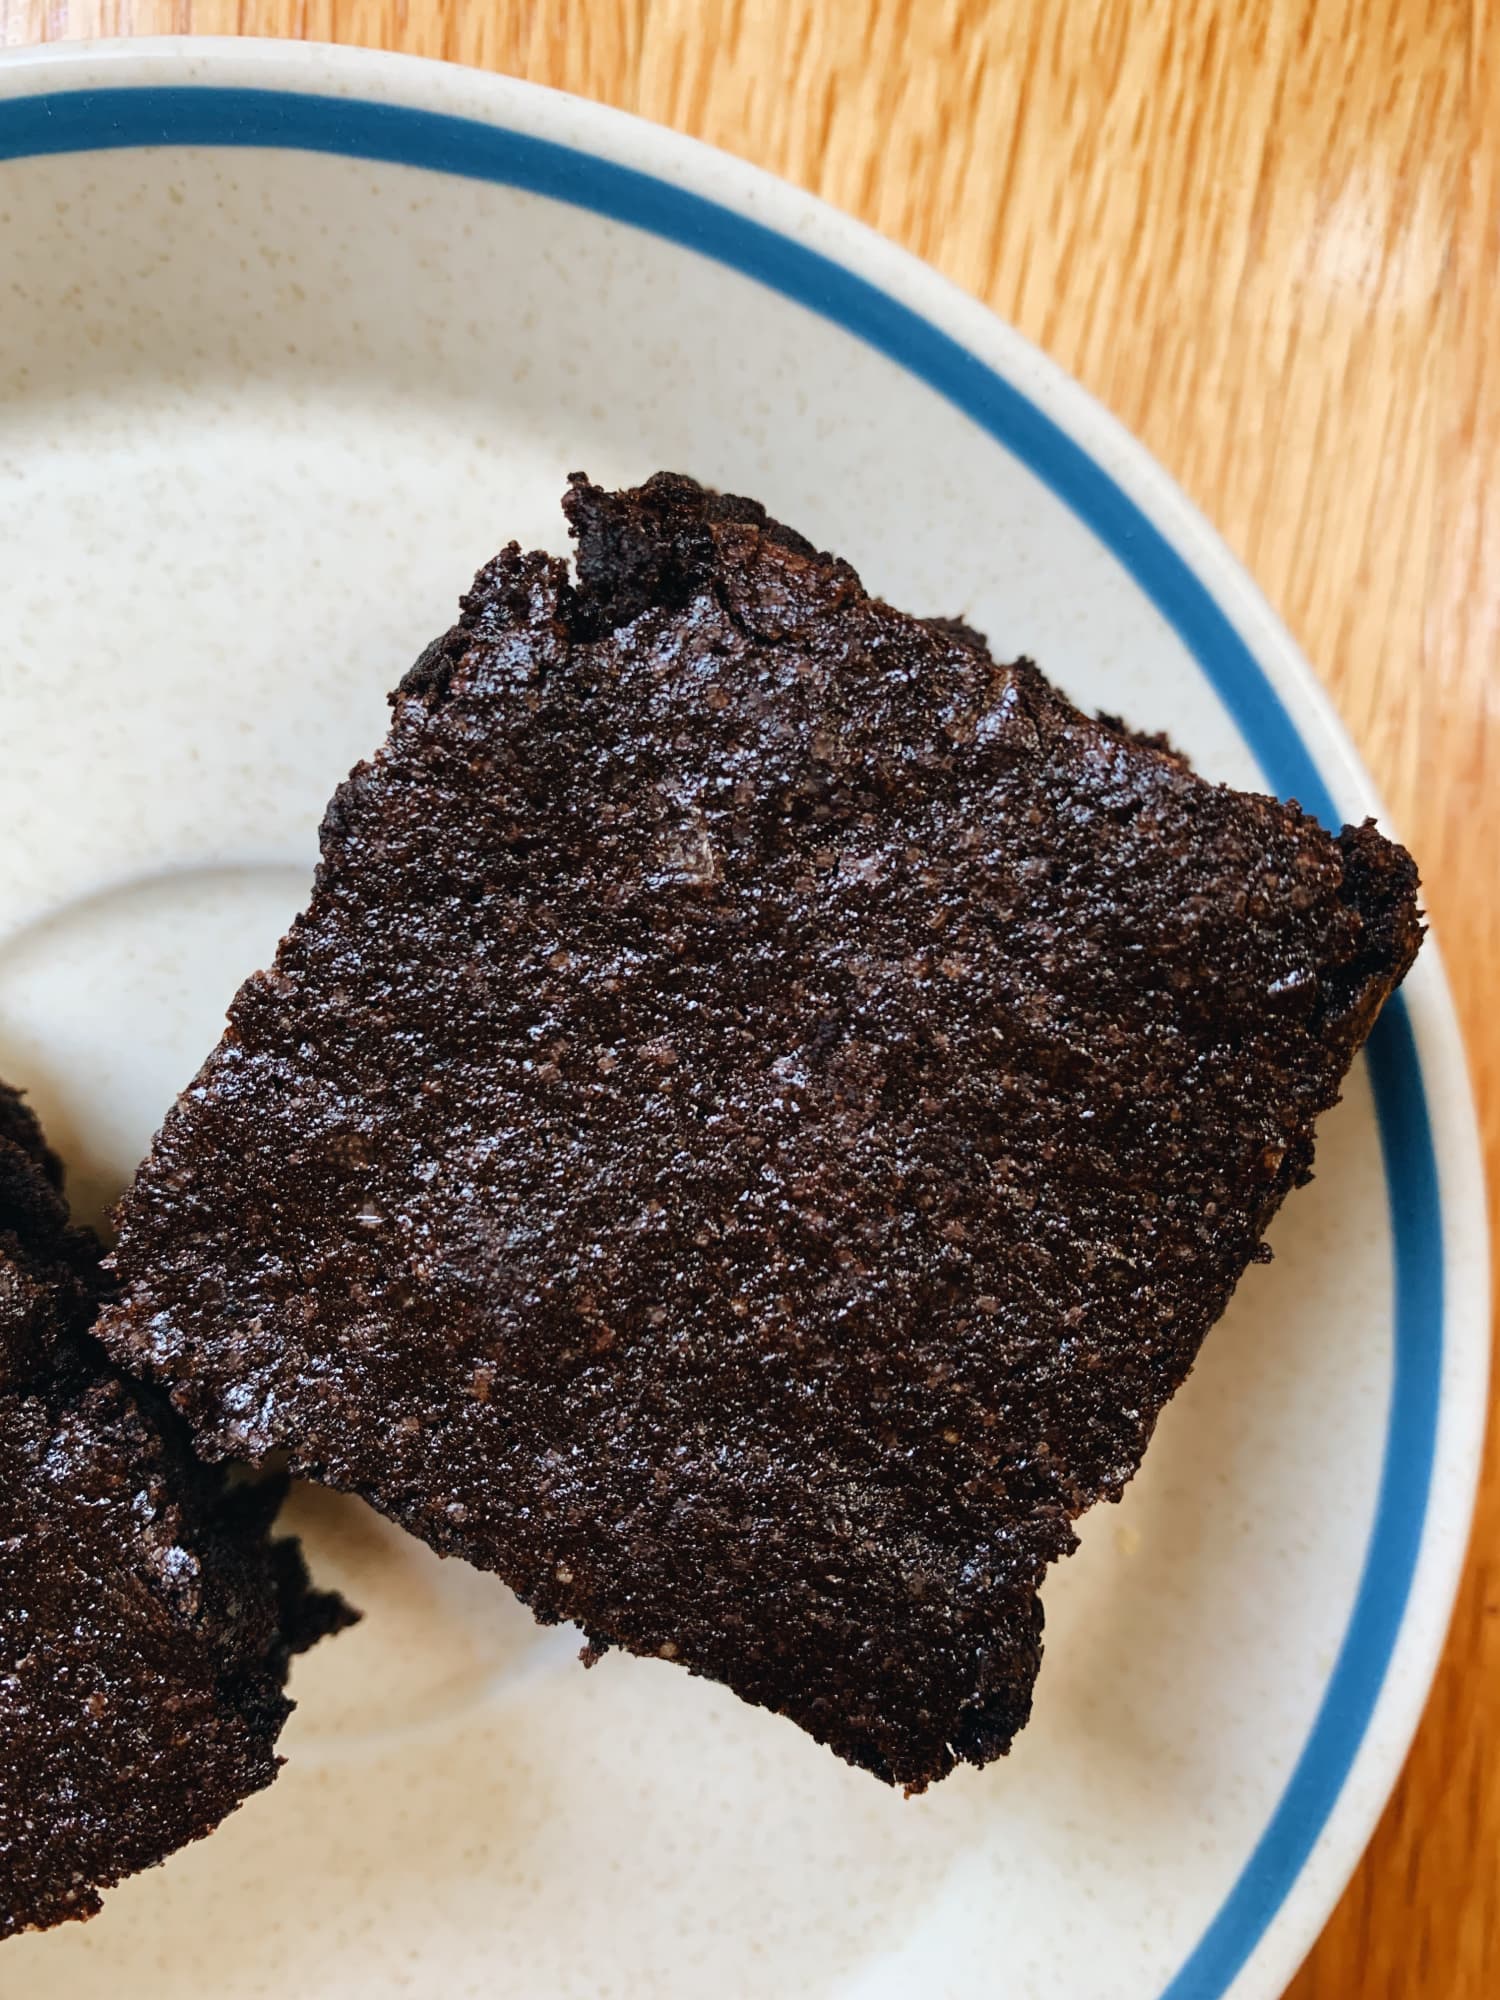 This Back-of-the-Bag Brownie Recipe Is the Best, Fudgiest Version I’ve Ever Baked